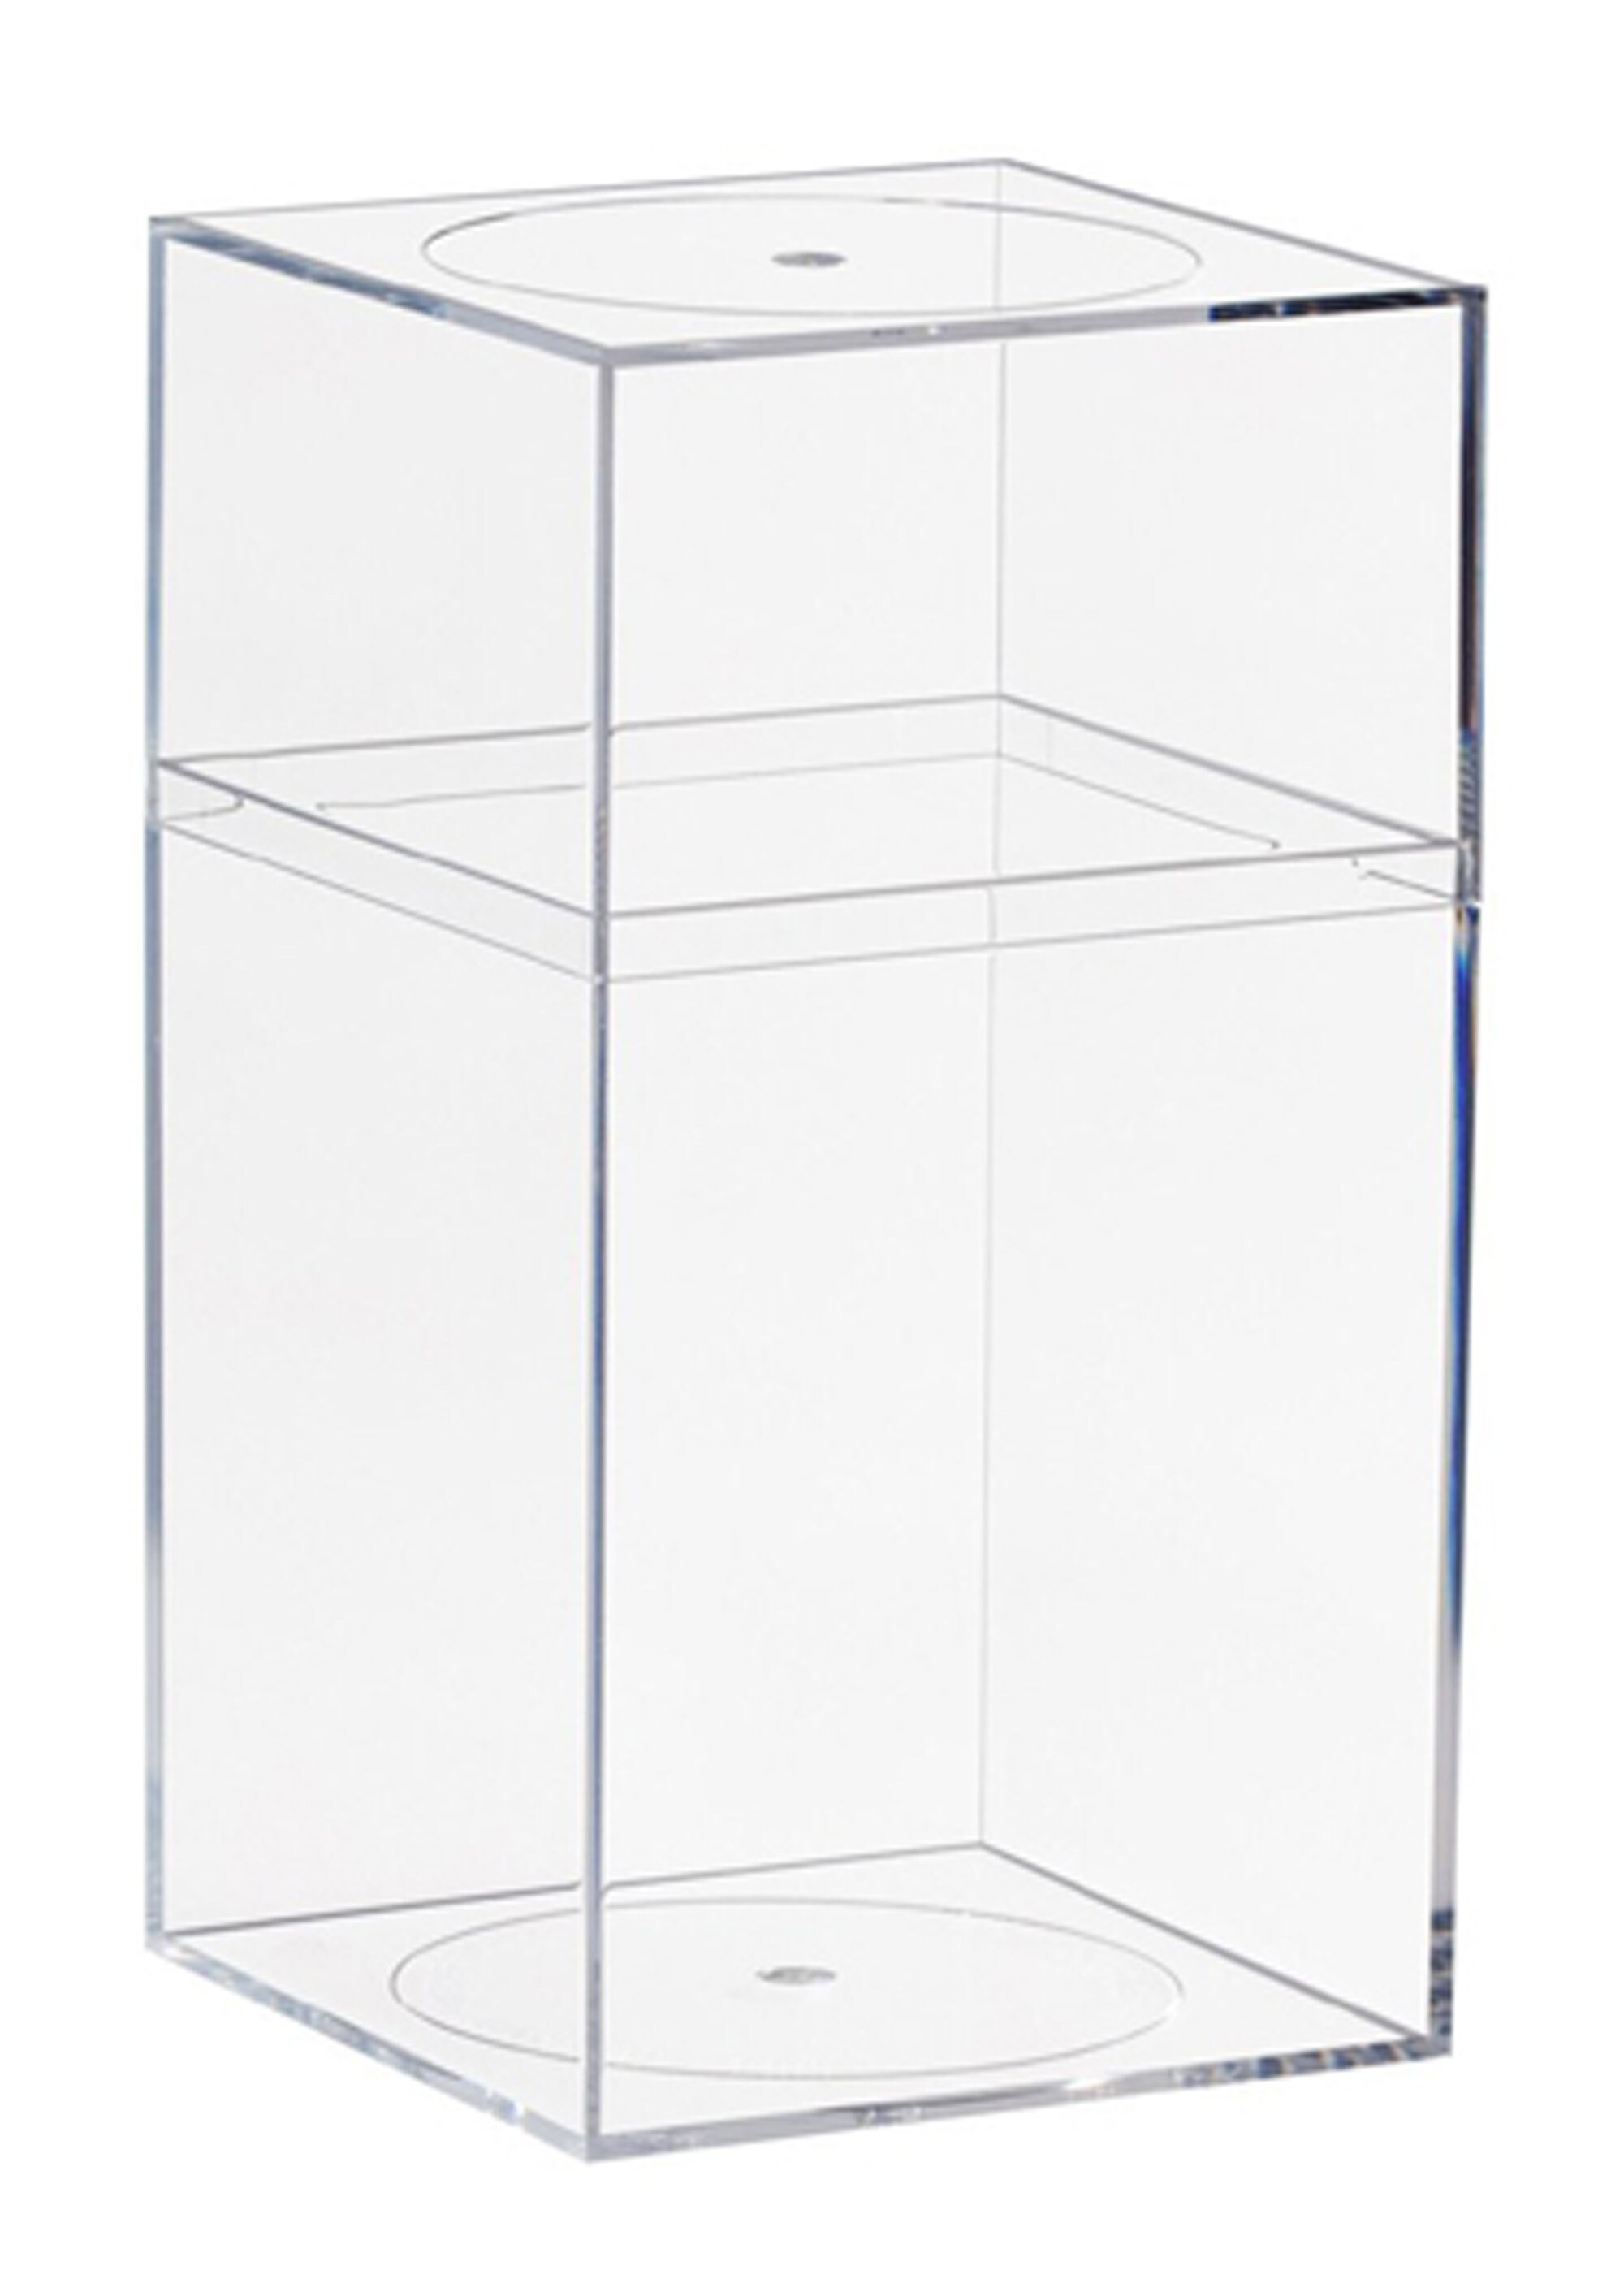 Small Clear Plastic Boxes Display Boxes, Clear Display Cases,transparent  Plastic Box, Eco System Terrarium Boxes Set of 12 PCS 